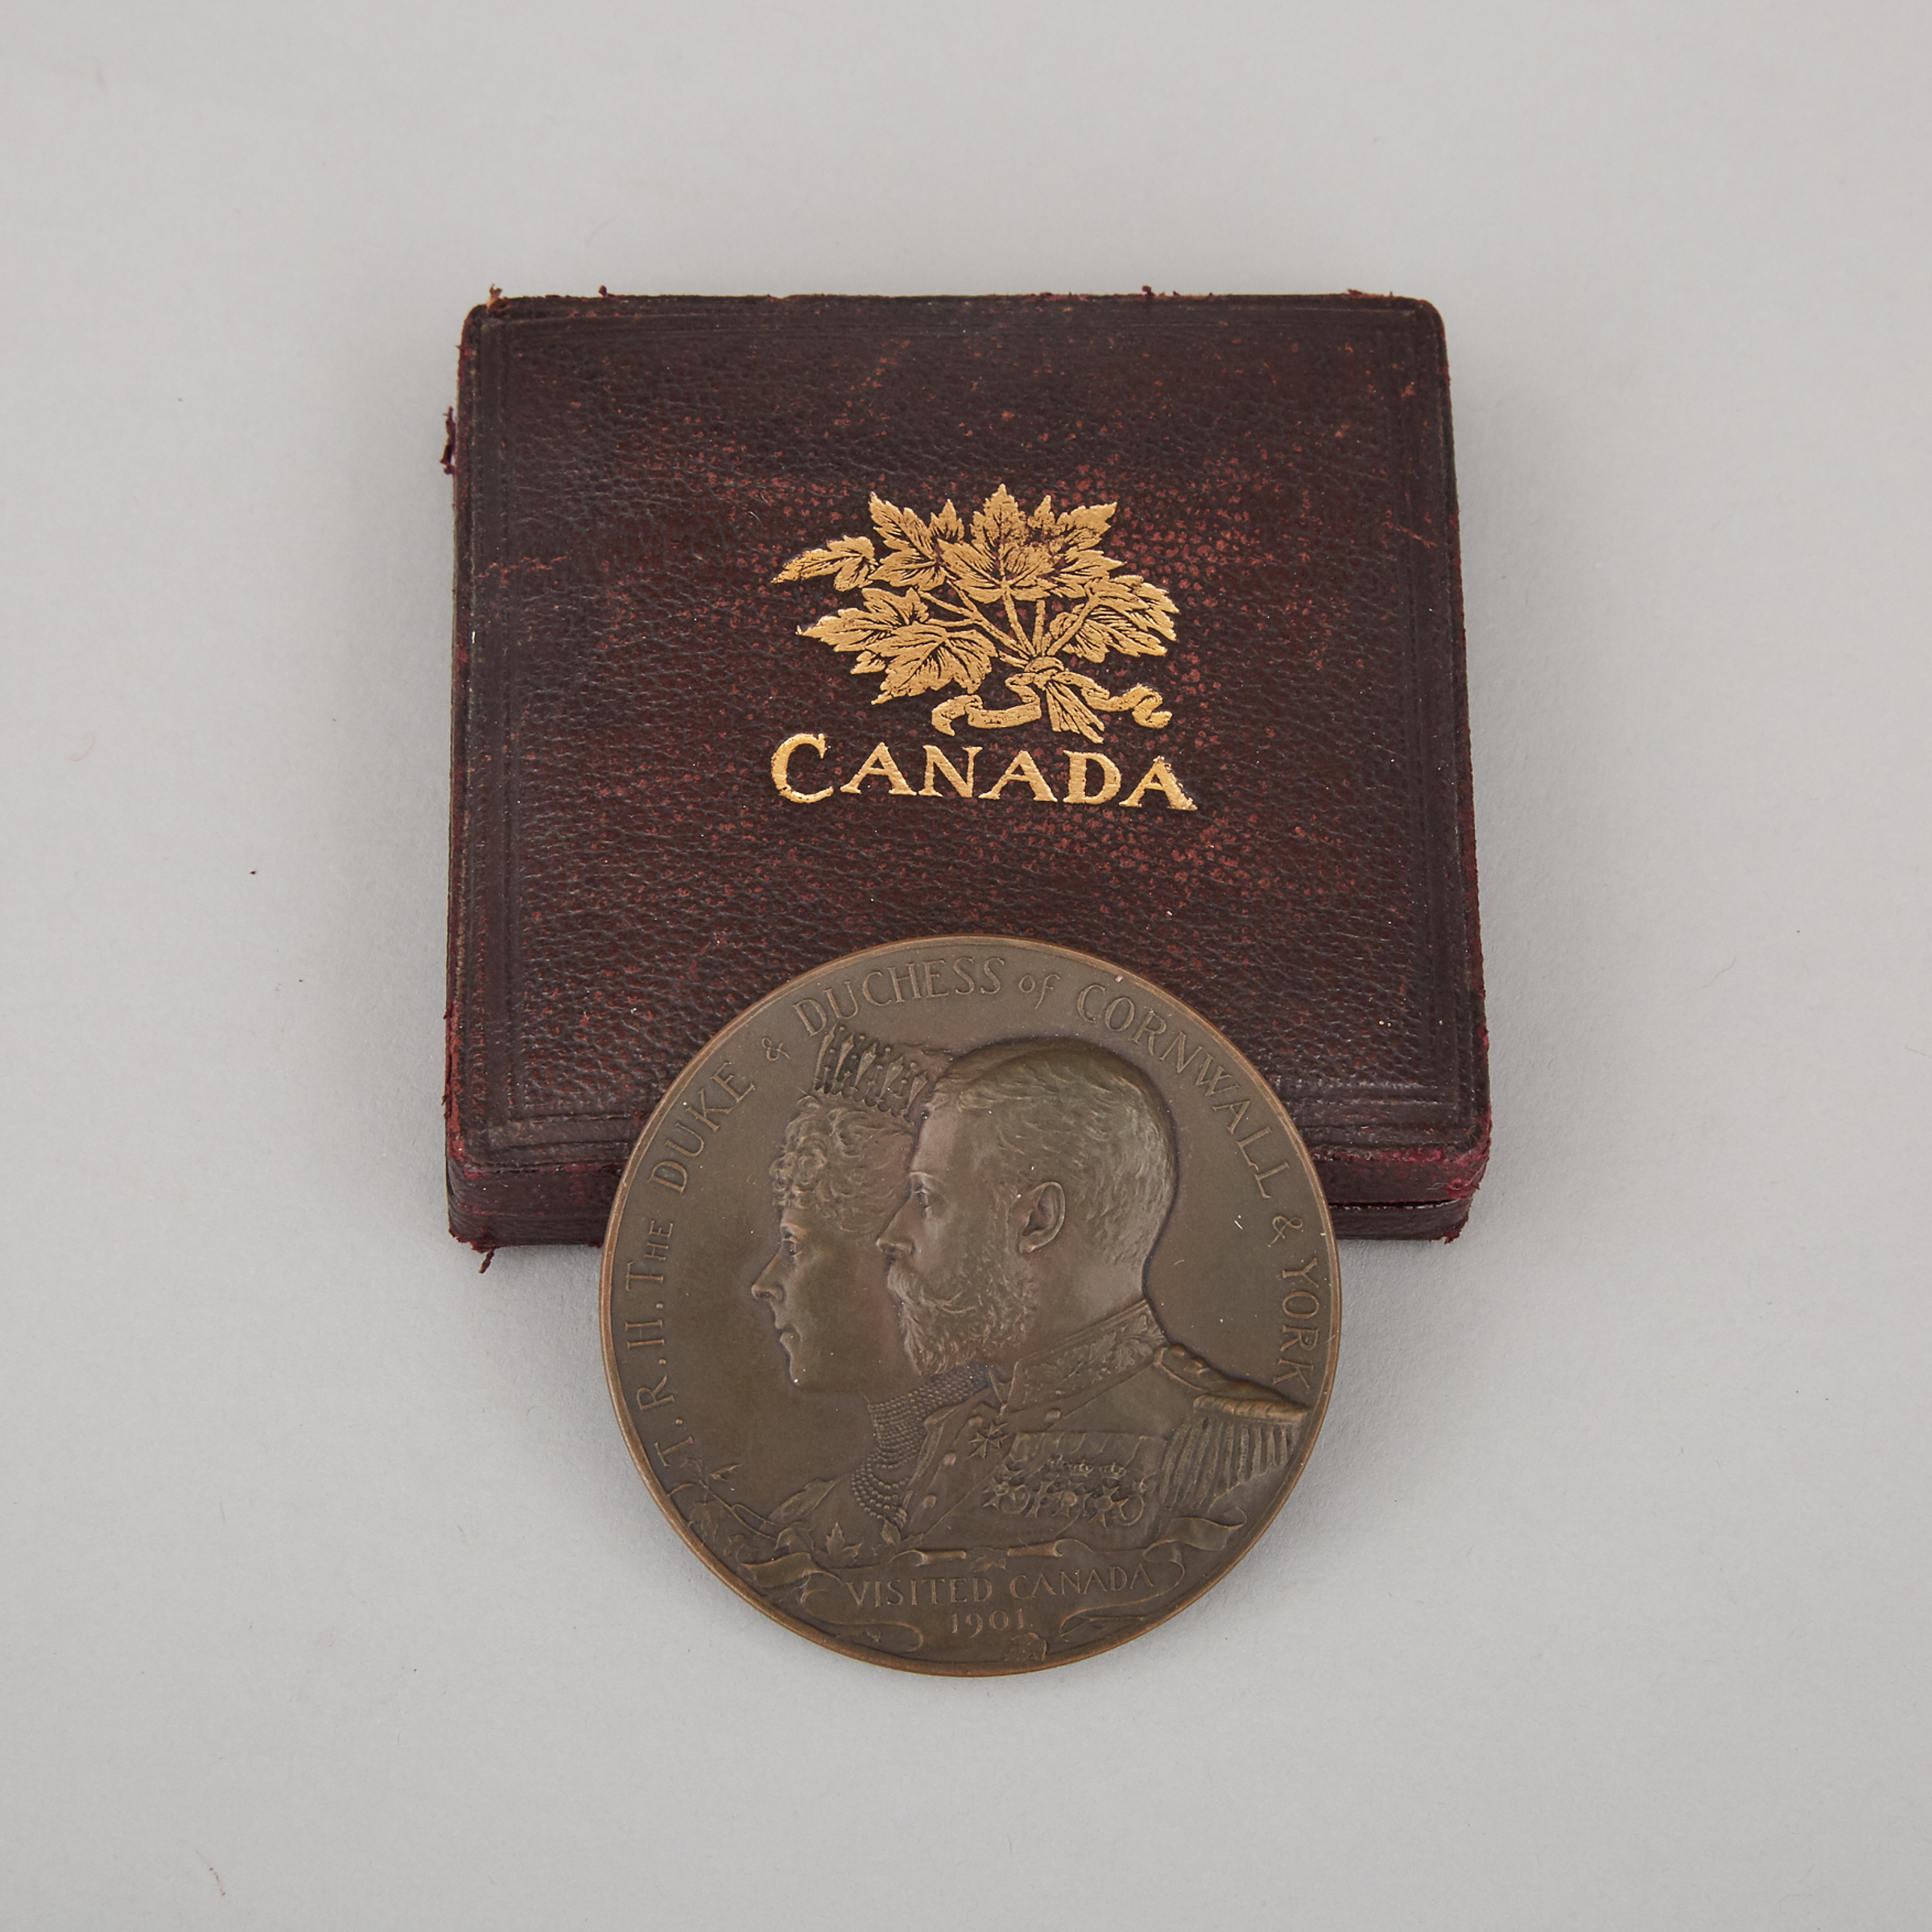 Bronze Medallion Commemorating the Visit of the Duke and Duchess of Cornwall and York Acknowledging Canada's Participation in the Boer War, 1901